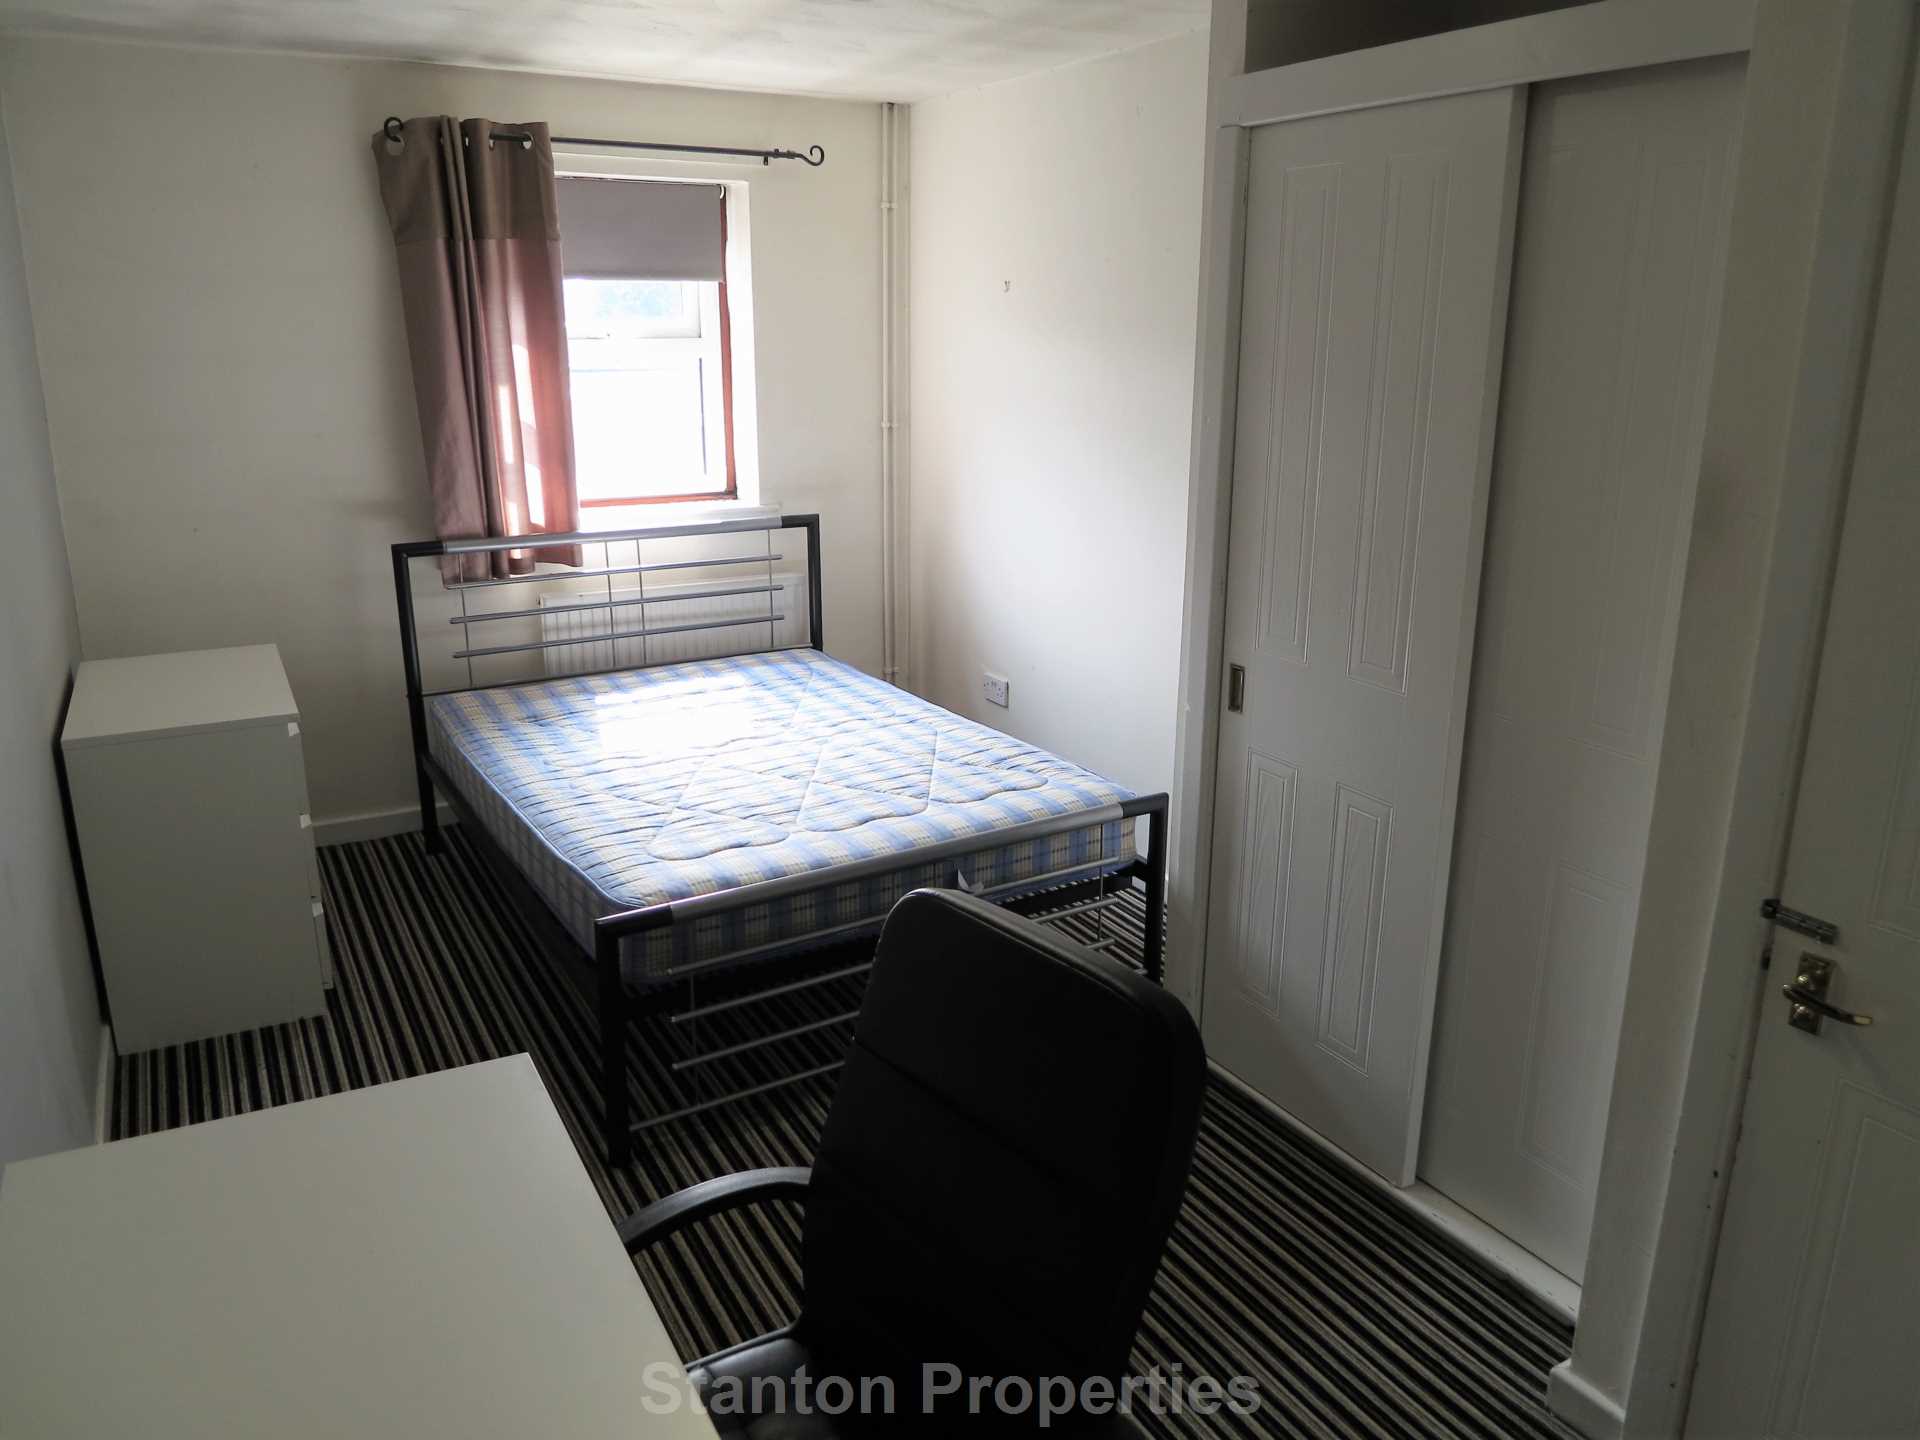 See Video Tour, £120 pppw, Copson Street, Withington, Image 13